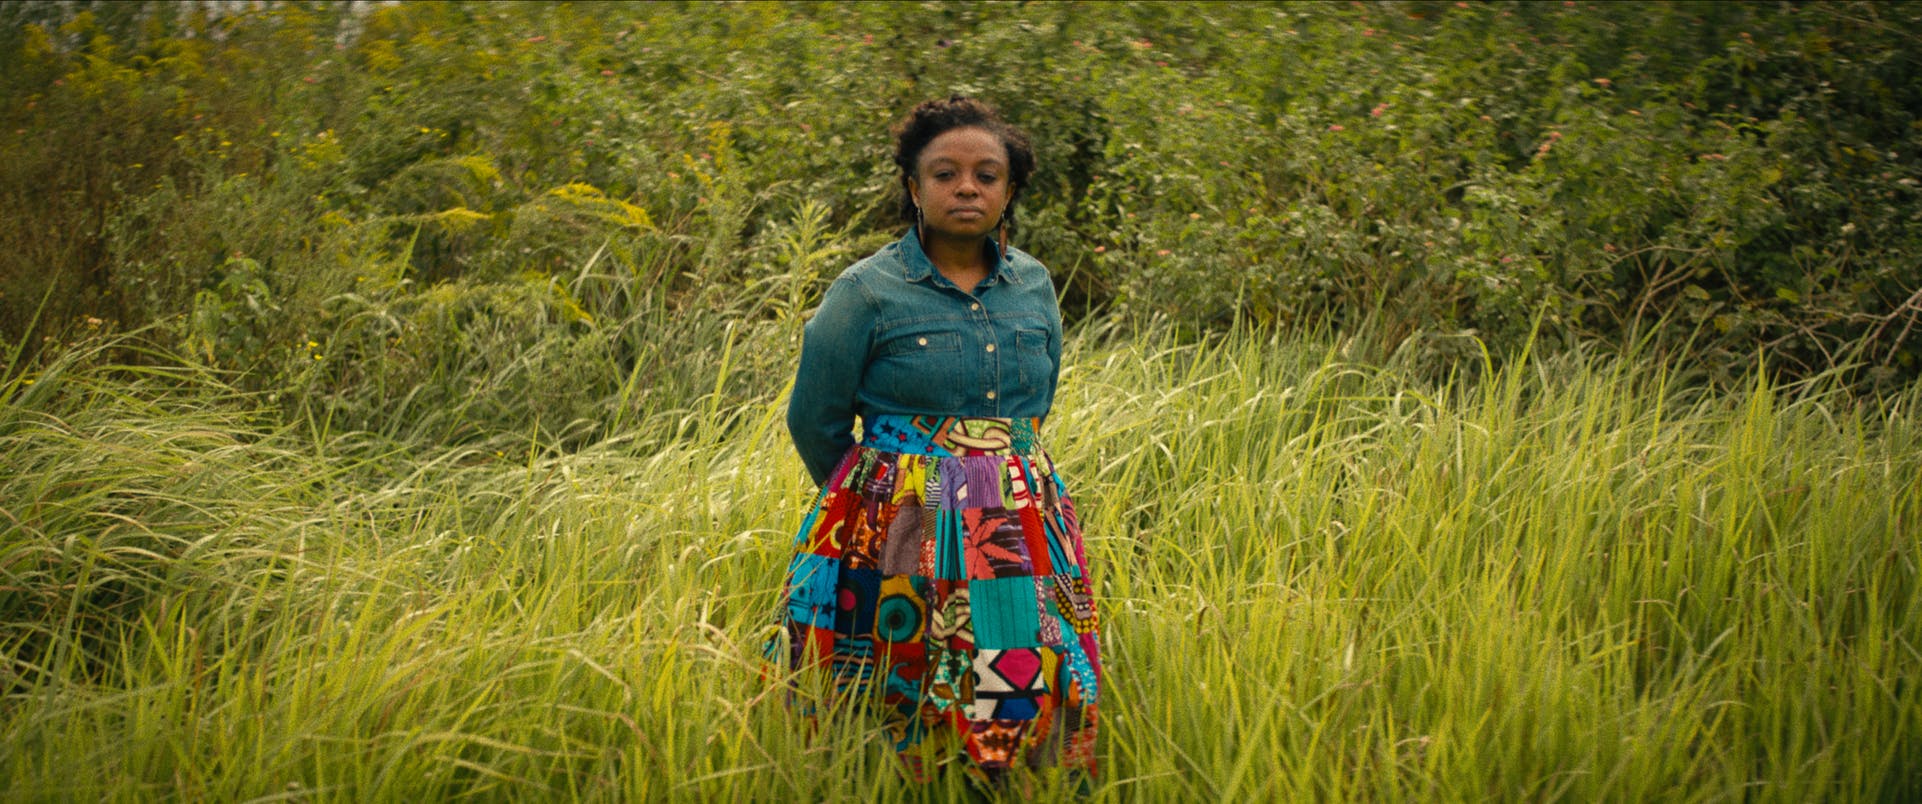 Joycelyn Davis wears a denim long-sleeved shirt and patterned skirt, and stands in a field of tall grass.